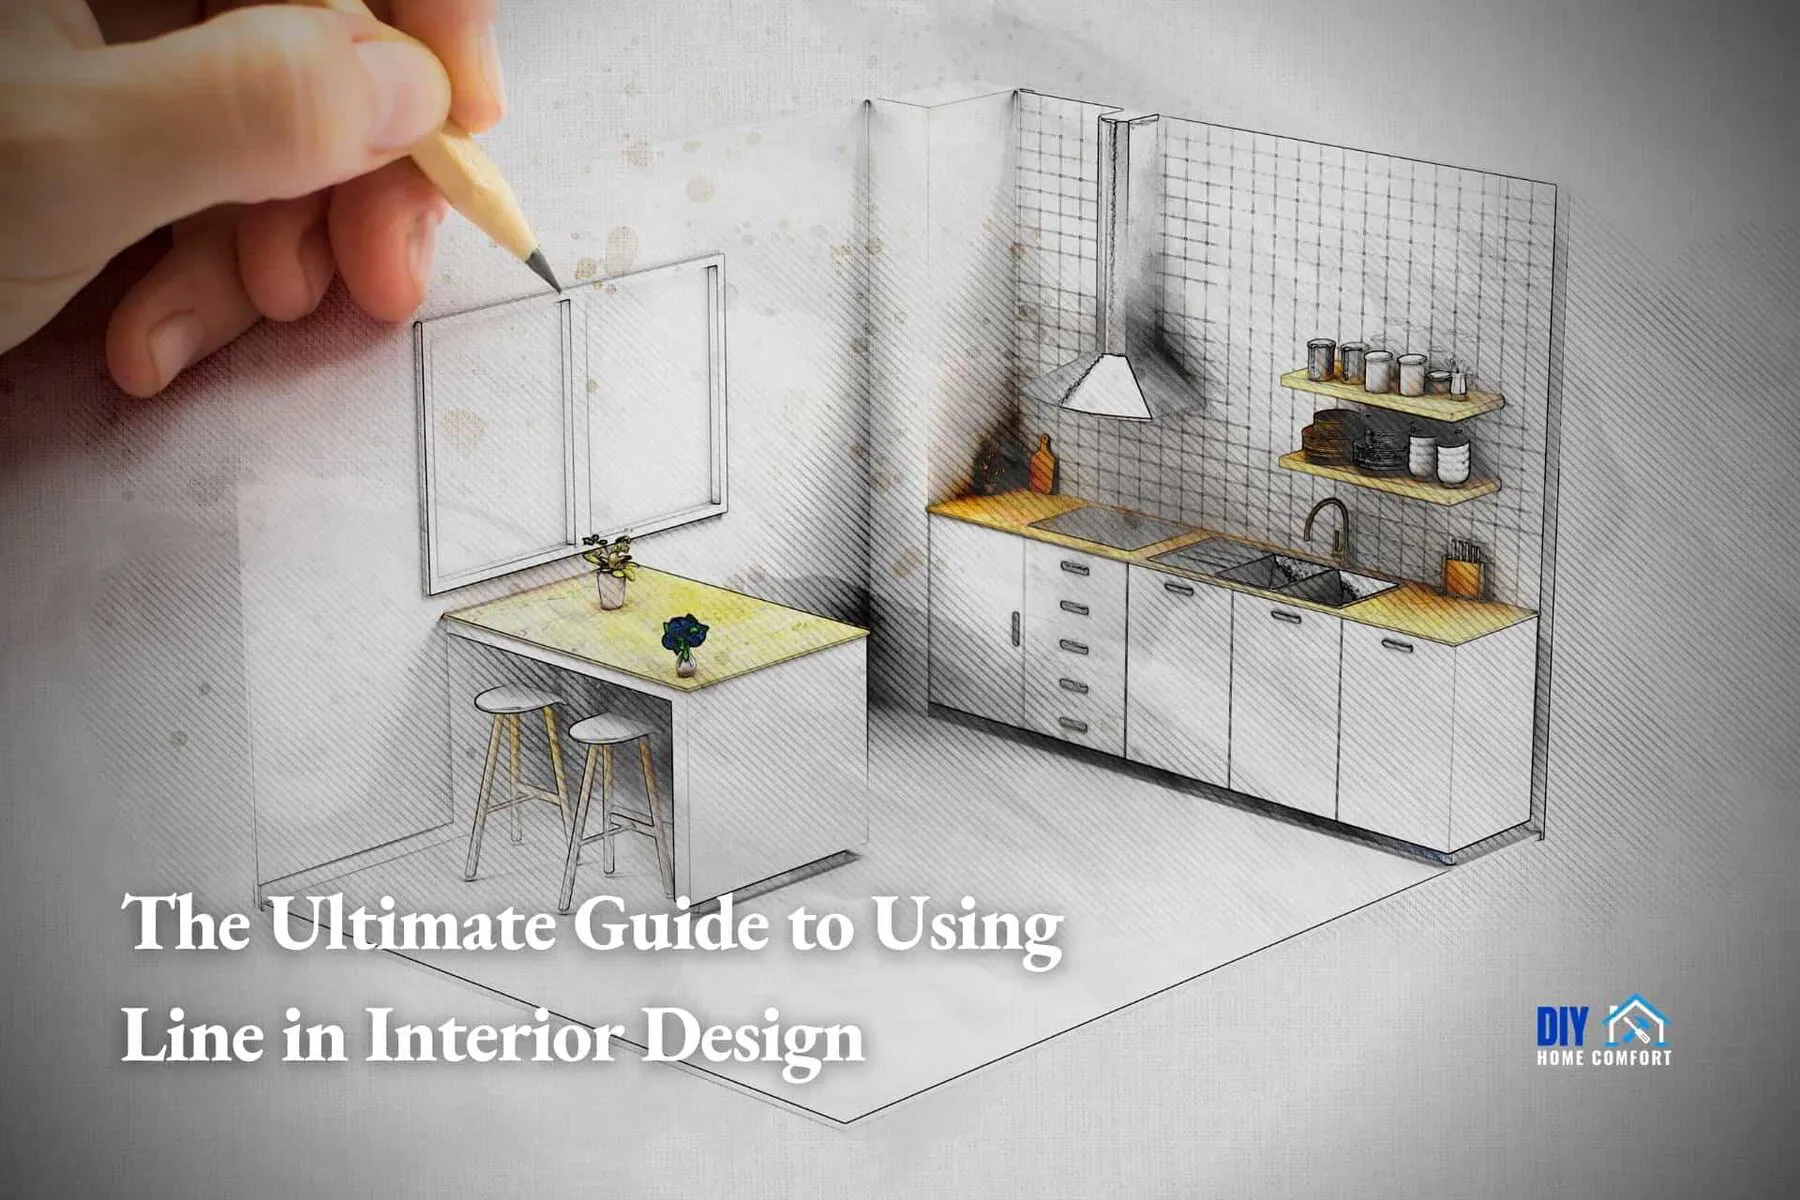 The Ultimate Guide to Using Line in Interior Design | DIY Home Comfort